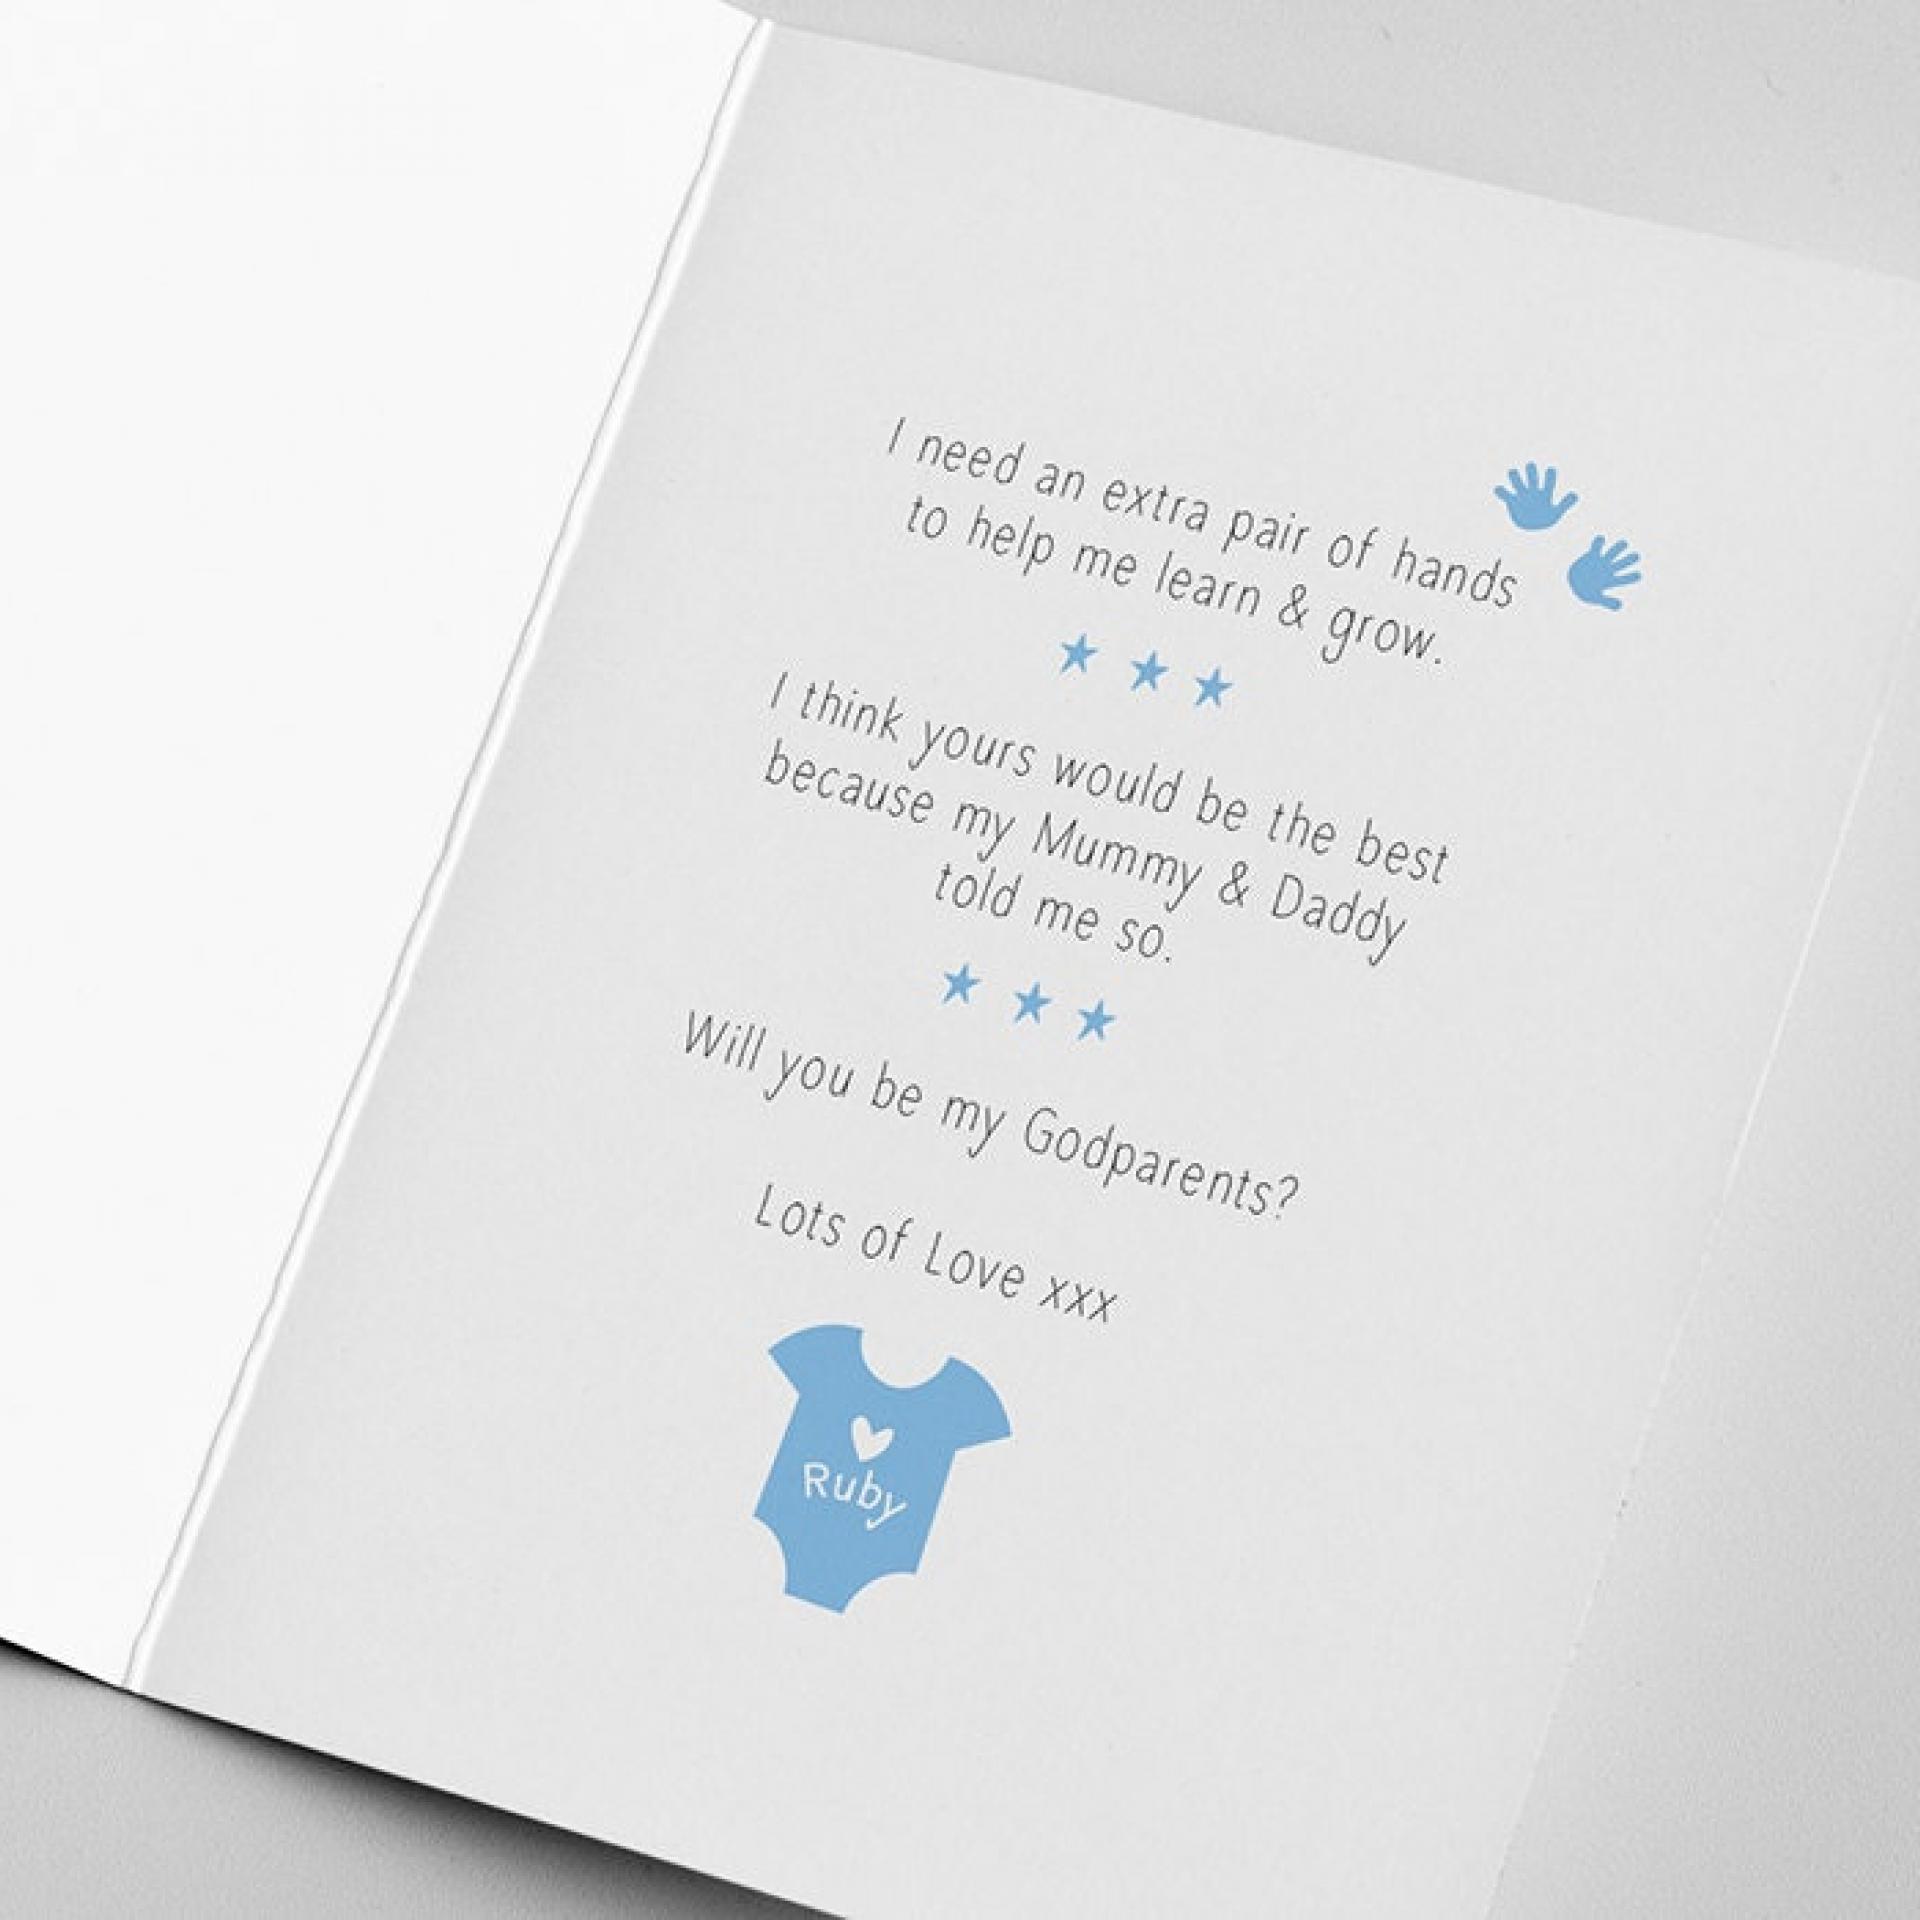 Personalised Godparents Card - Will you be my Godparents? With Message Inside, Asking Godparents, Baptism, Christening, Godparents card